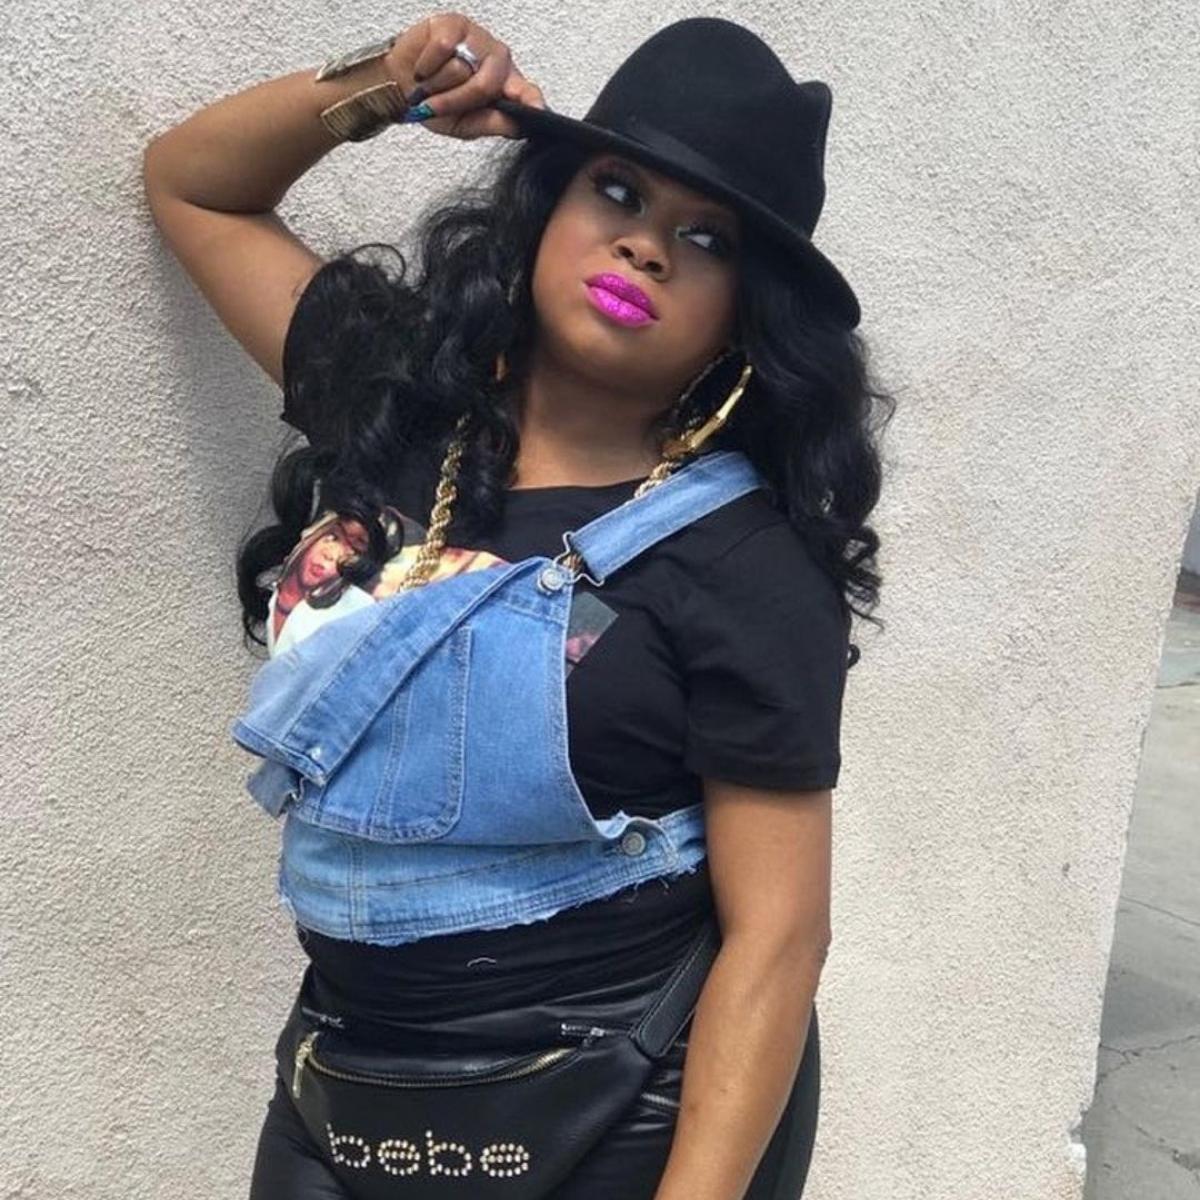 Countess Vaughn's Health Struggles: How's She Doing Now?